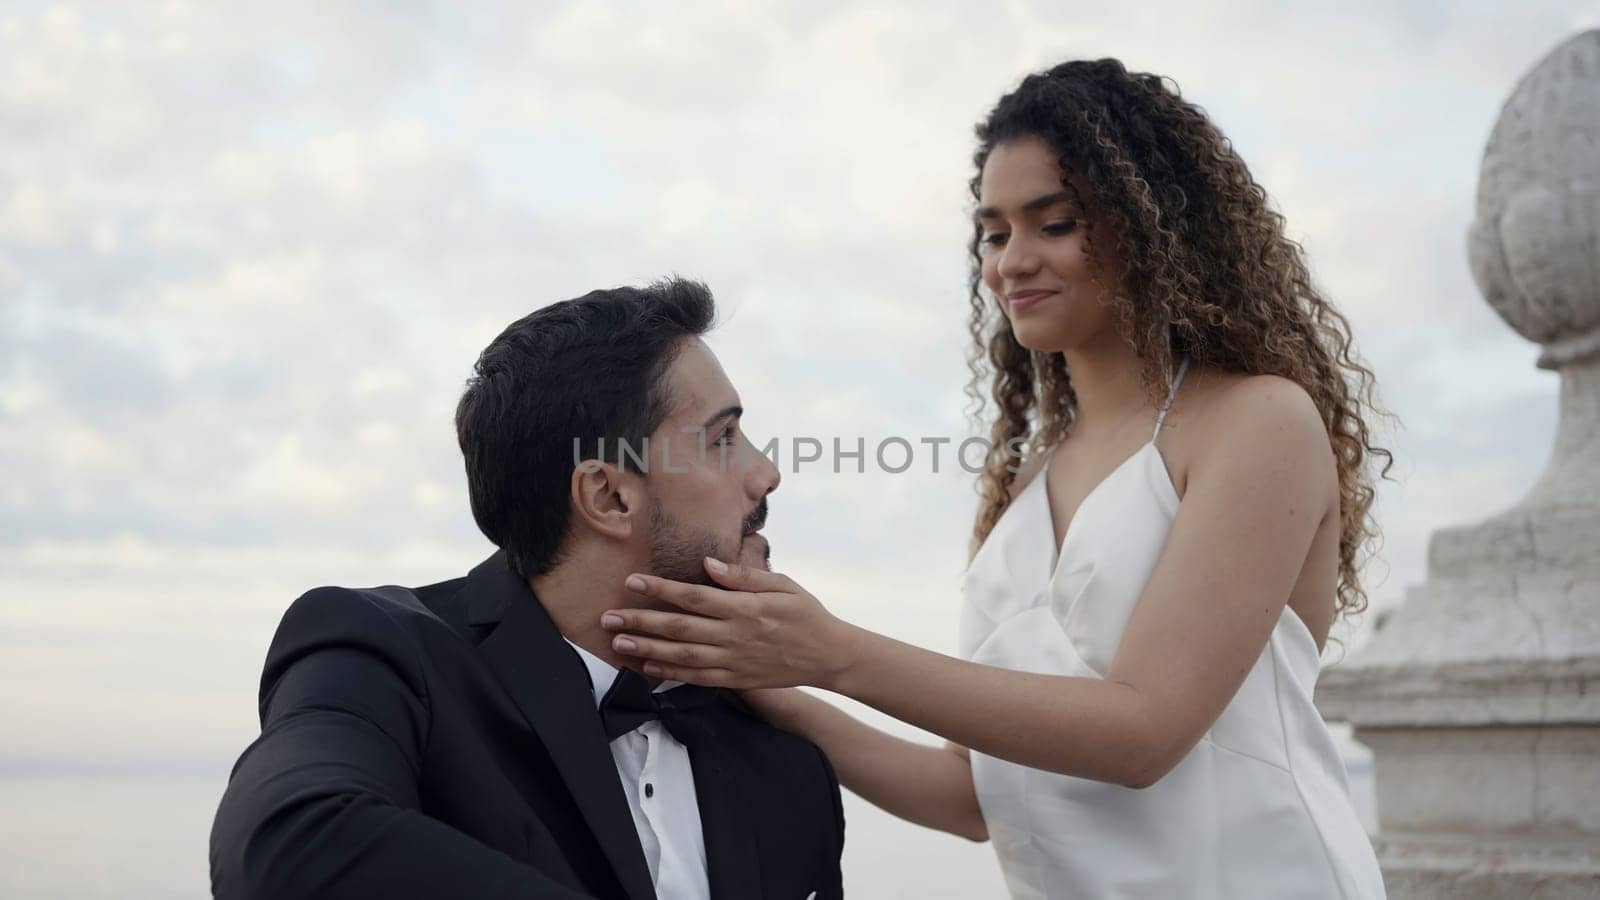 Happy couple in suit and white dress on a date outdoors. Action. Woman with curly hair gently touching face of a man in official suit